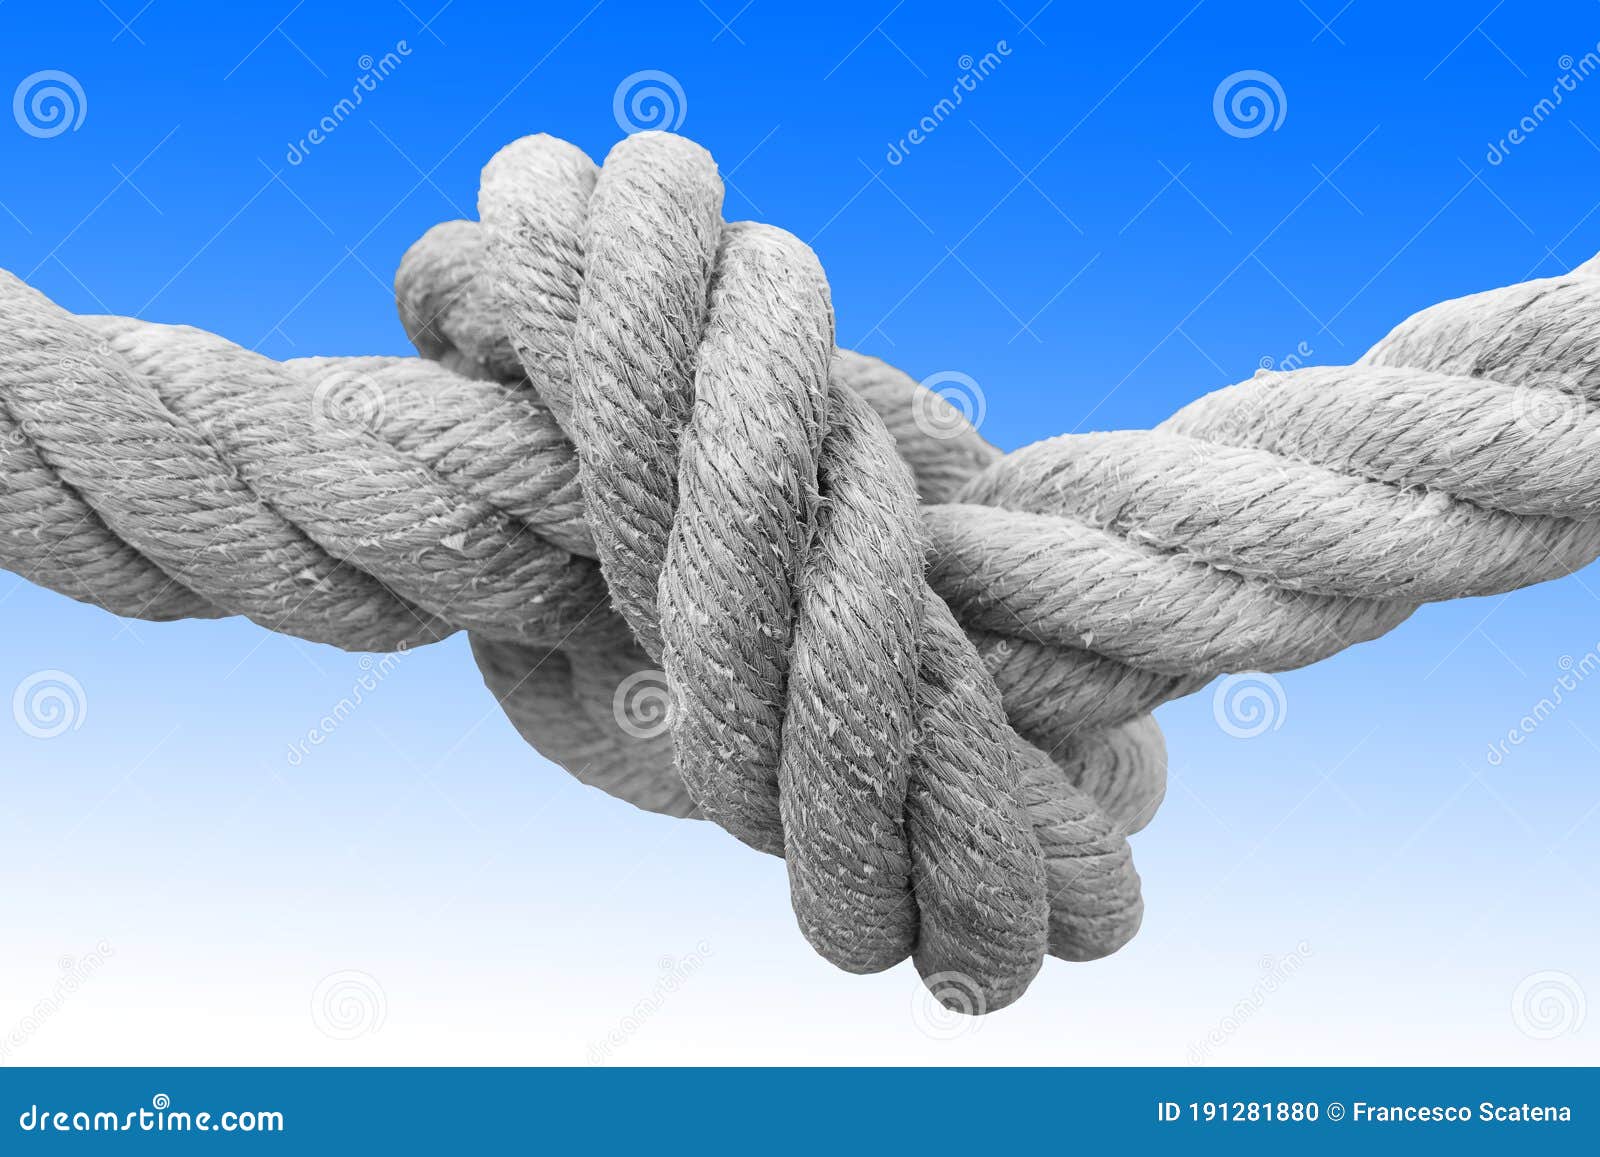 Strong Rope with Single Knot - Concept Image Against a Blue and White  Background Stock Photo - Image of blue, hitch: 191281880